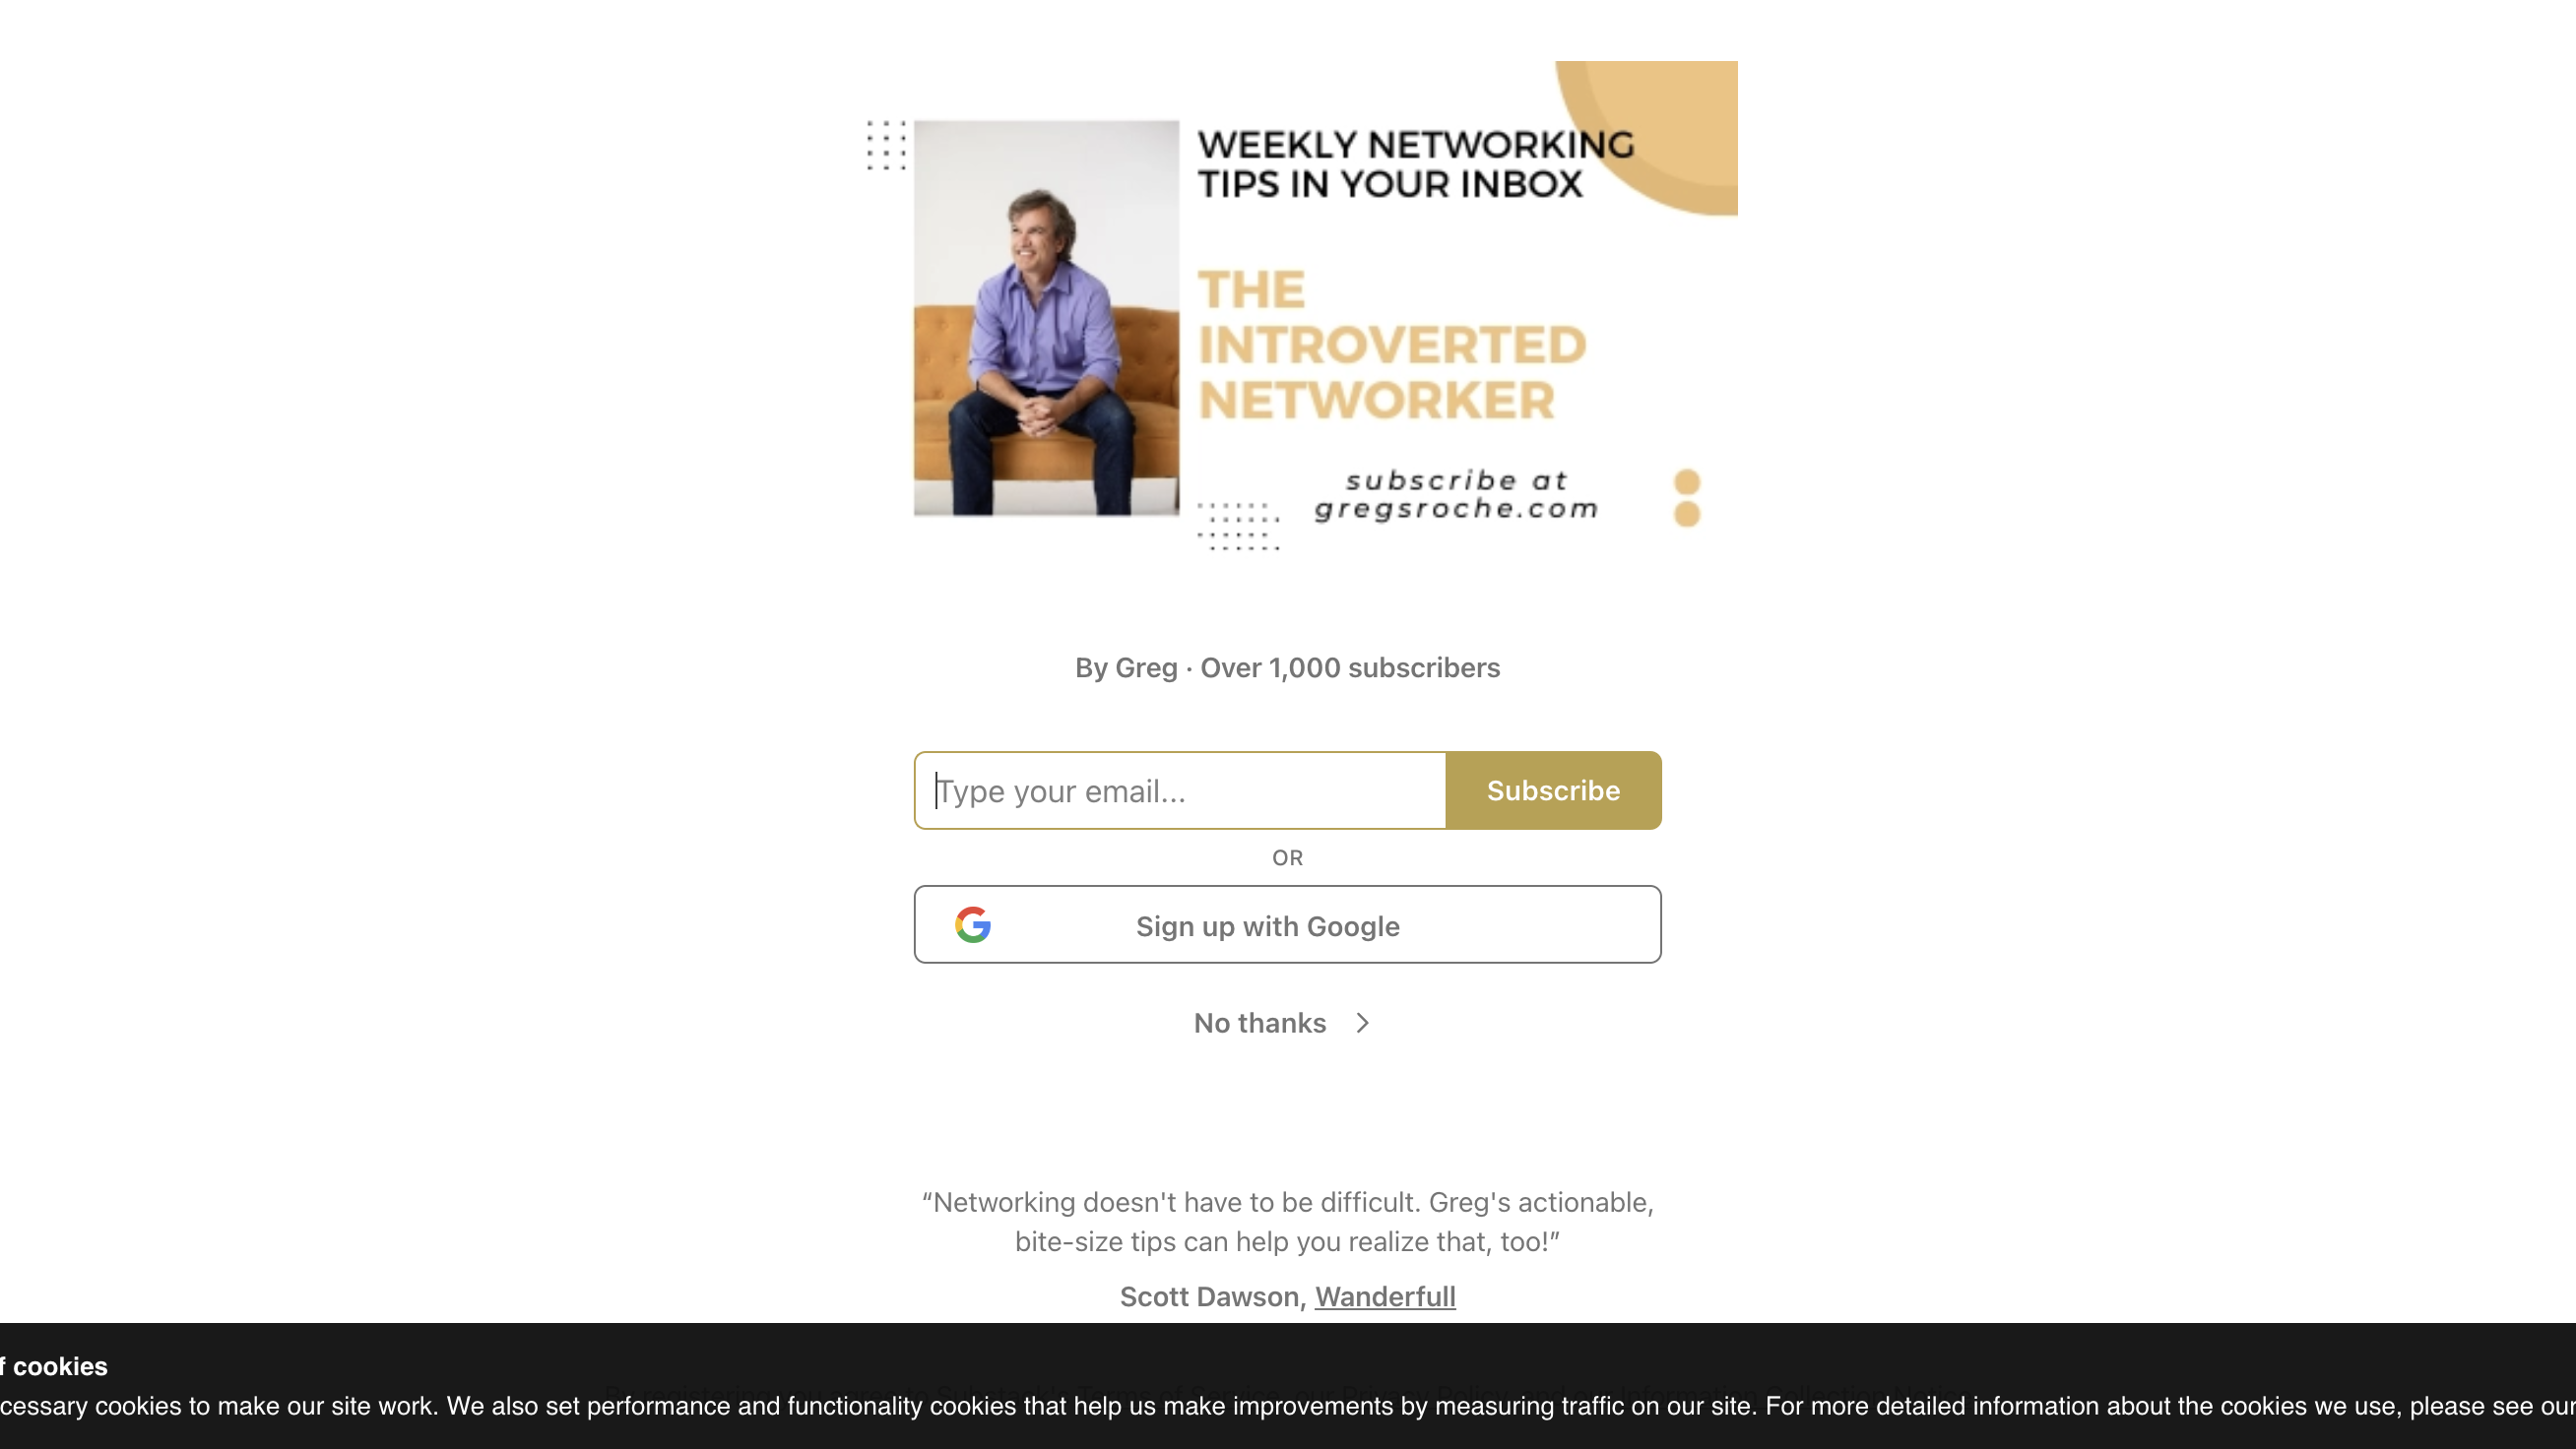 The Introverted Networker  homepage